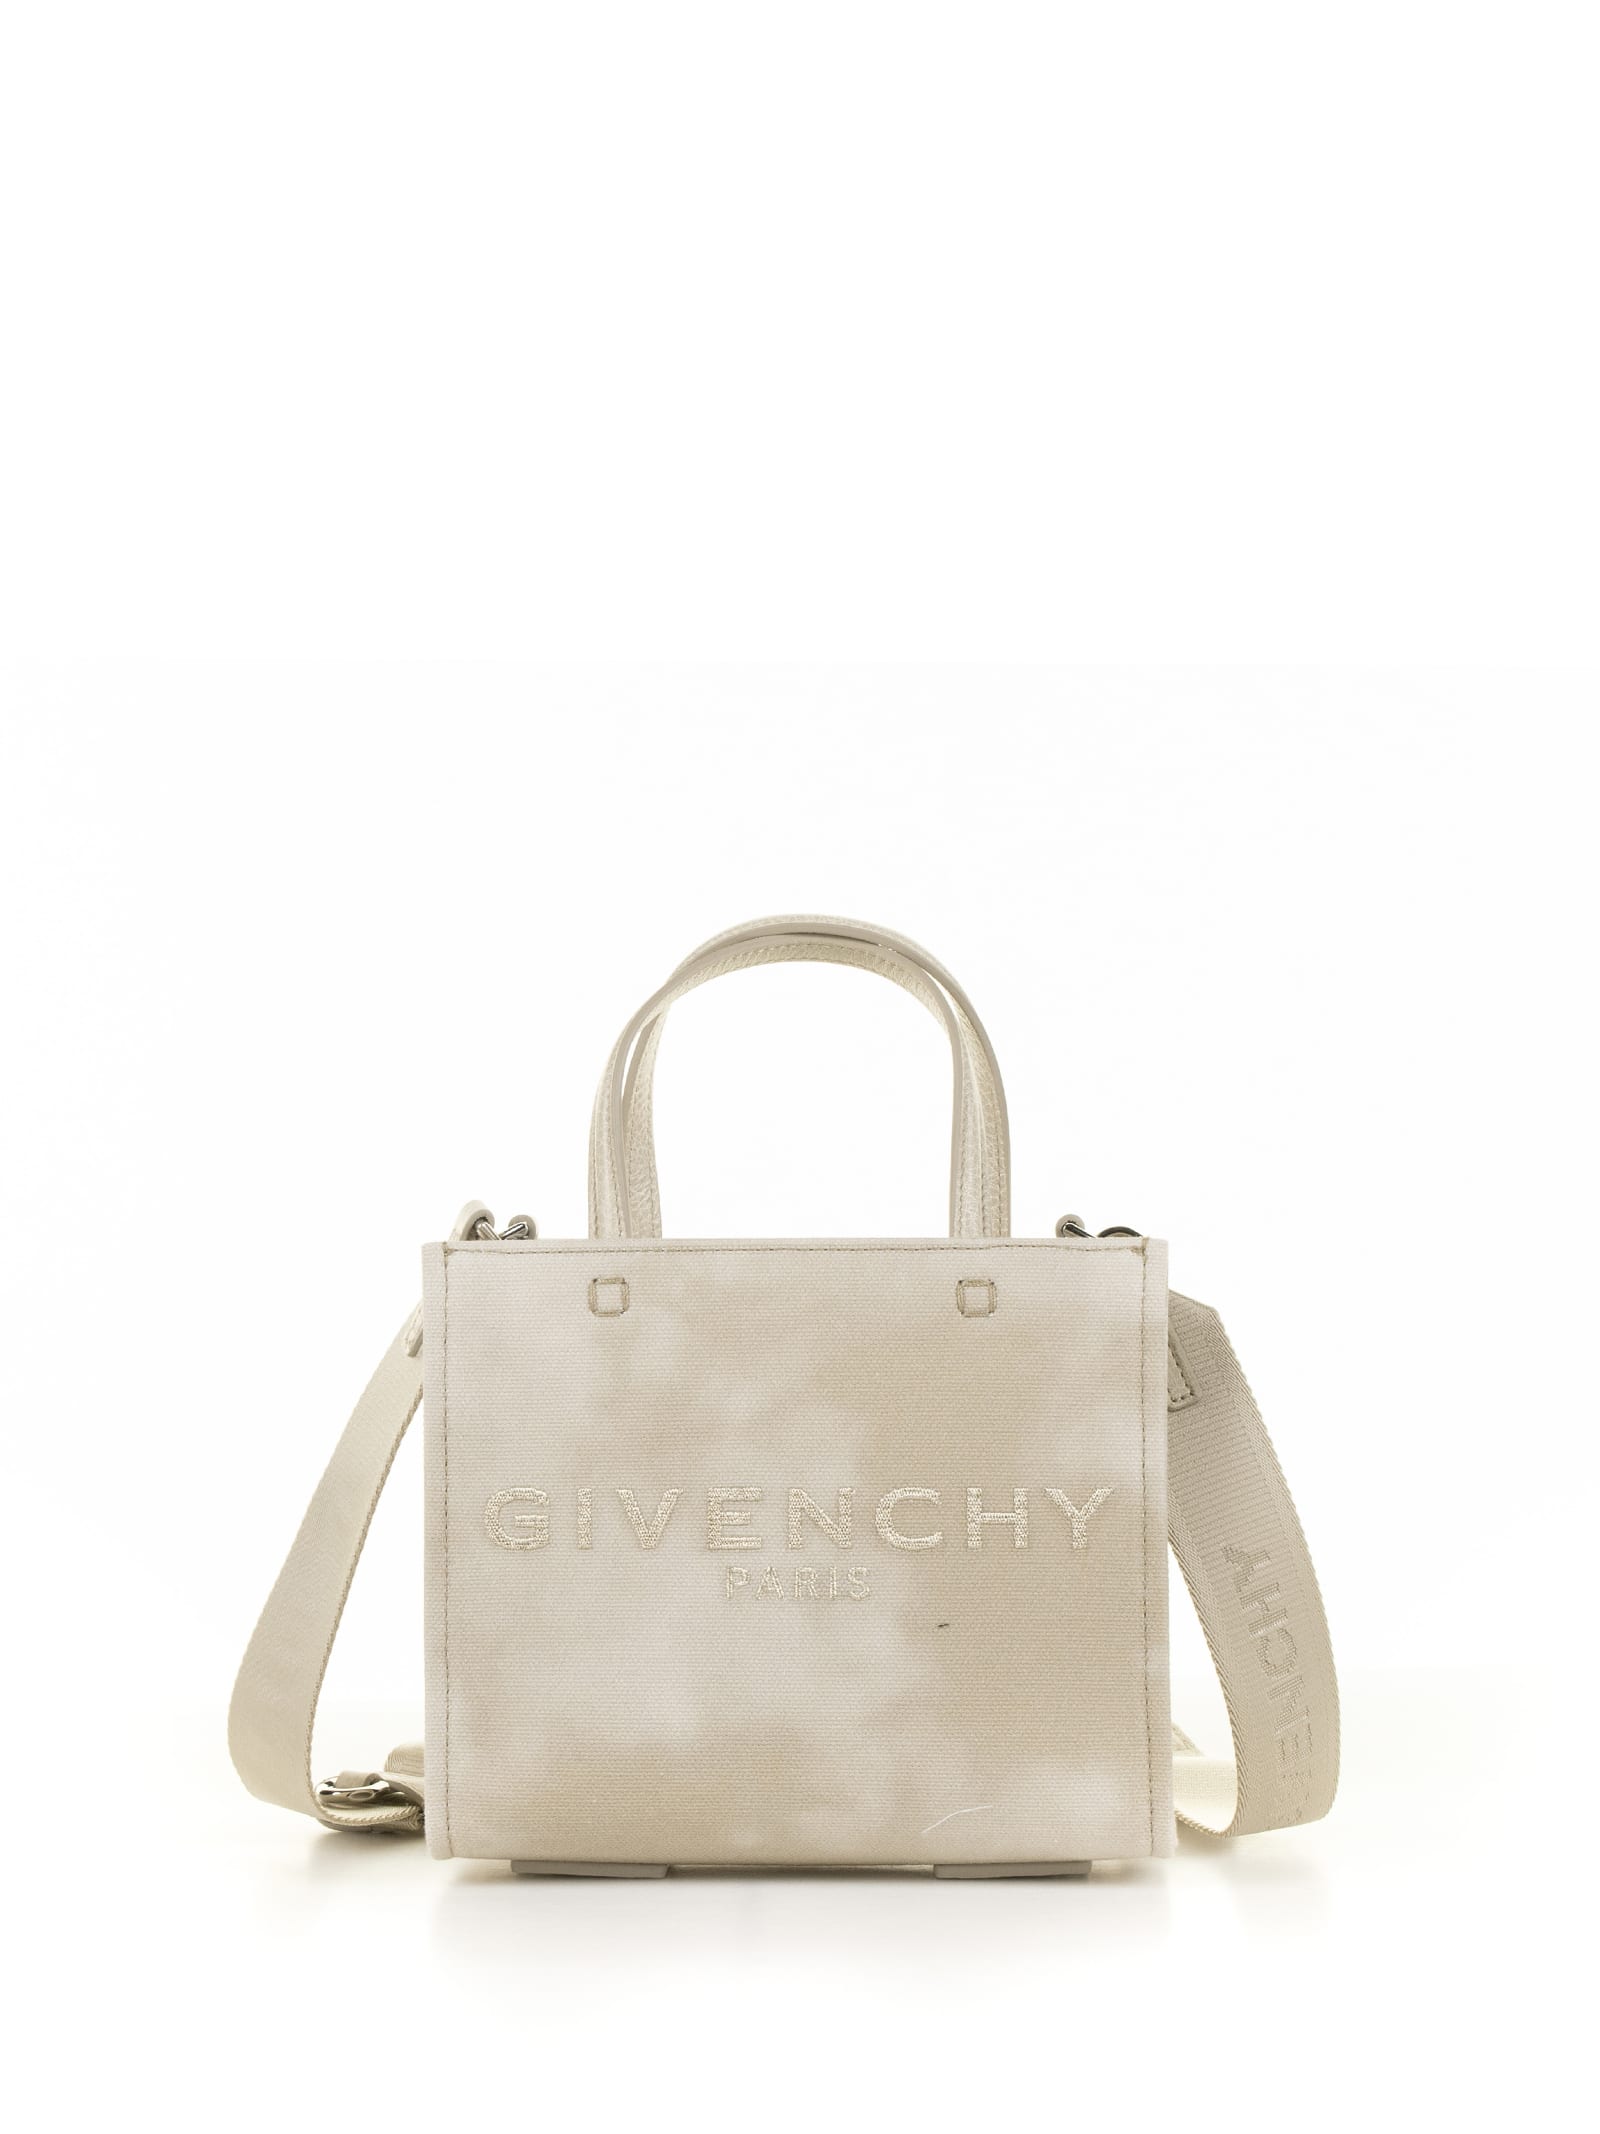 Givenchy Mini Tote Bag In Tie-dye Canvas In Dusty Gold